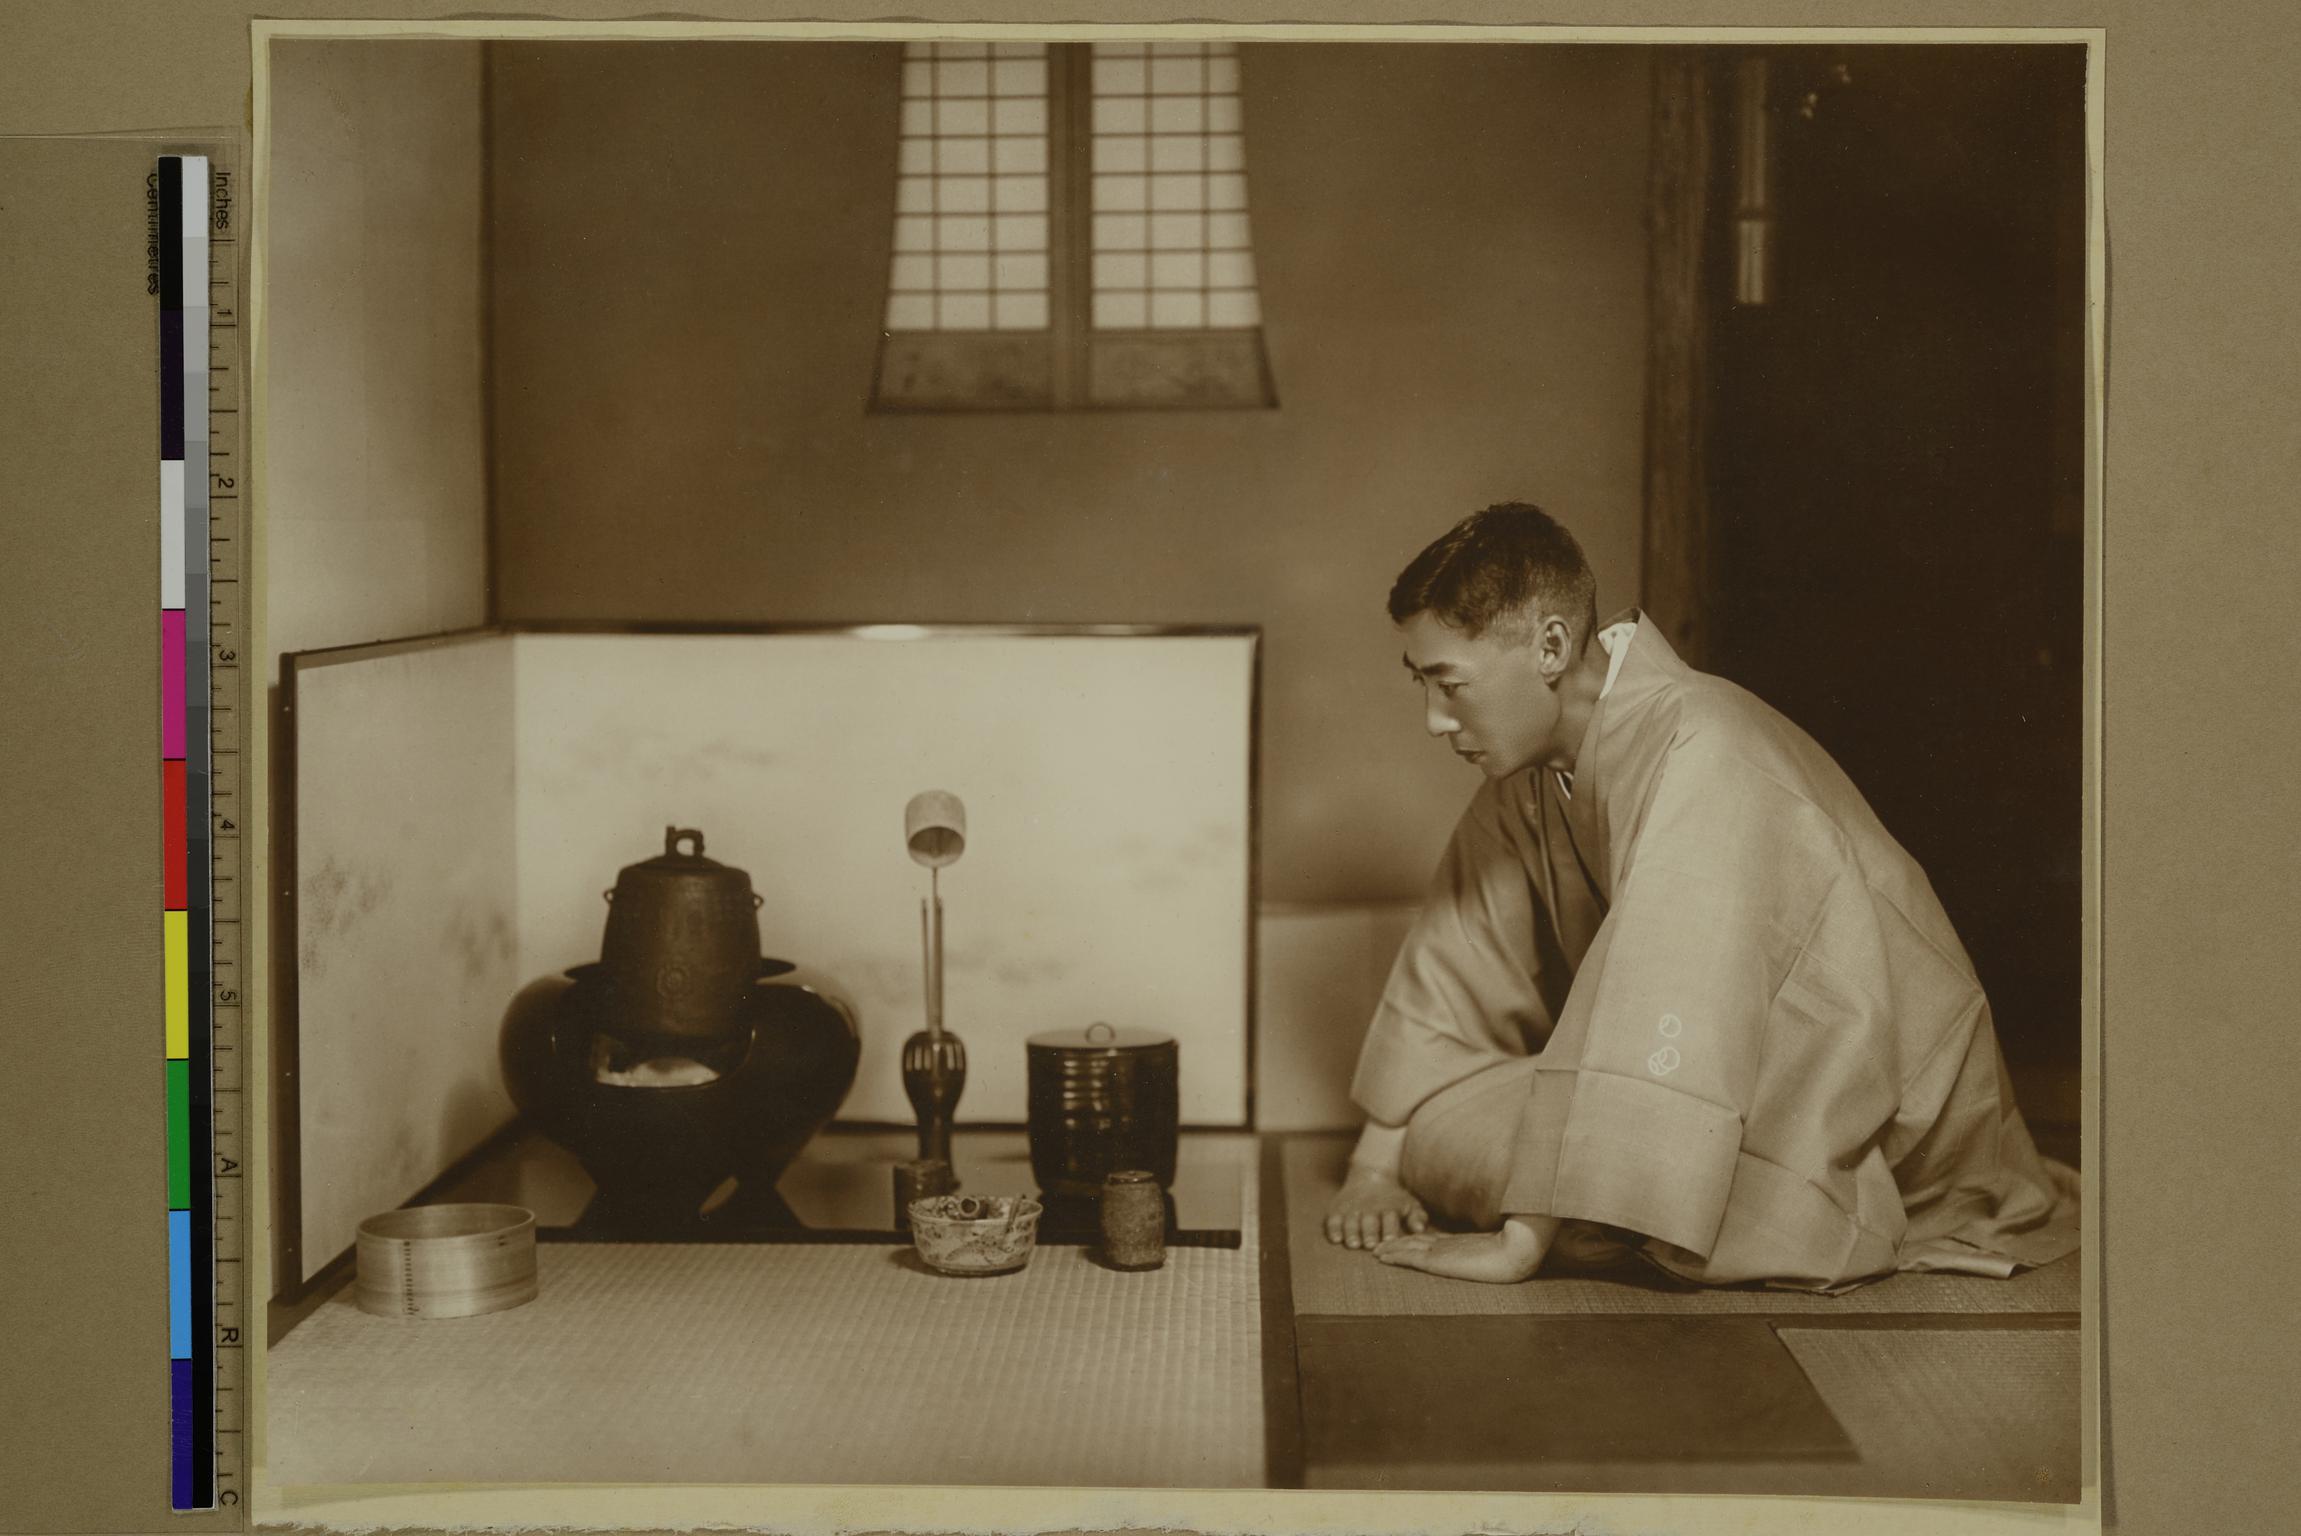 A Cha no yu Master observing the Implements